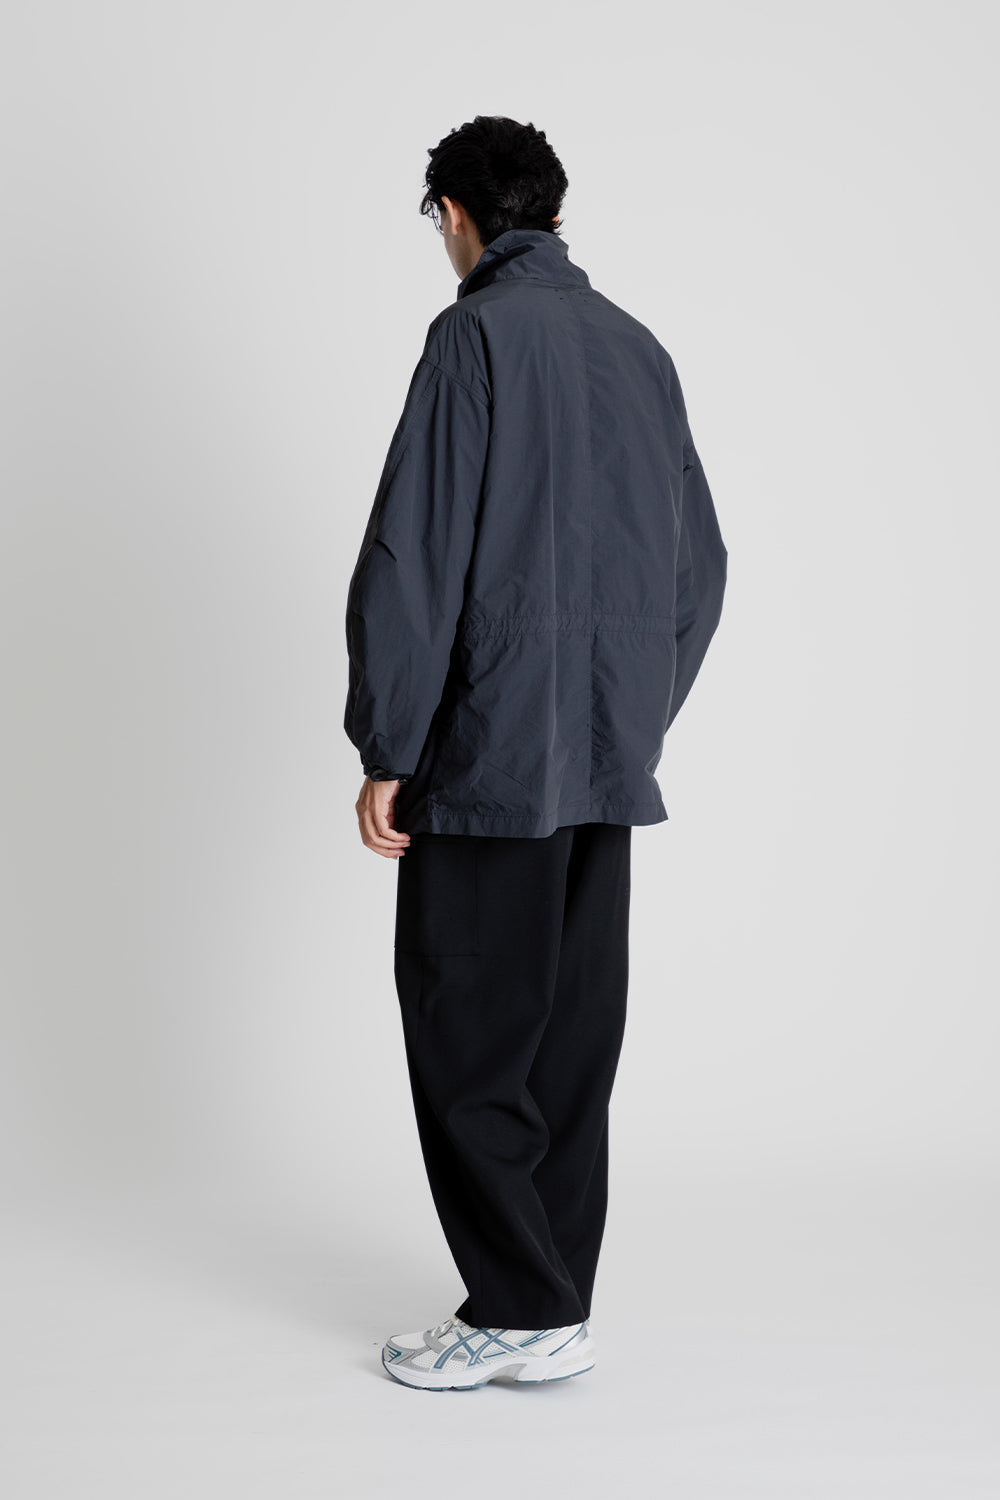 Aton Air Ventile Short Mods Coat in Charcoal Grey | Wallace